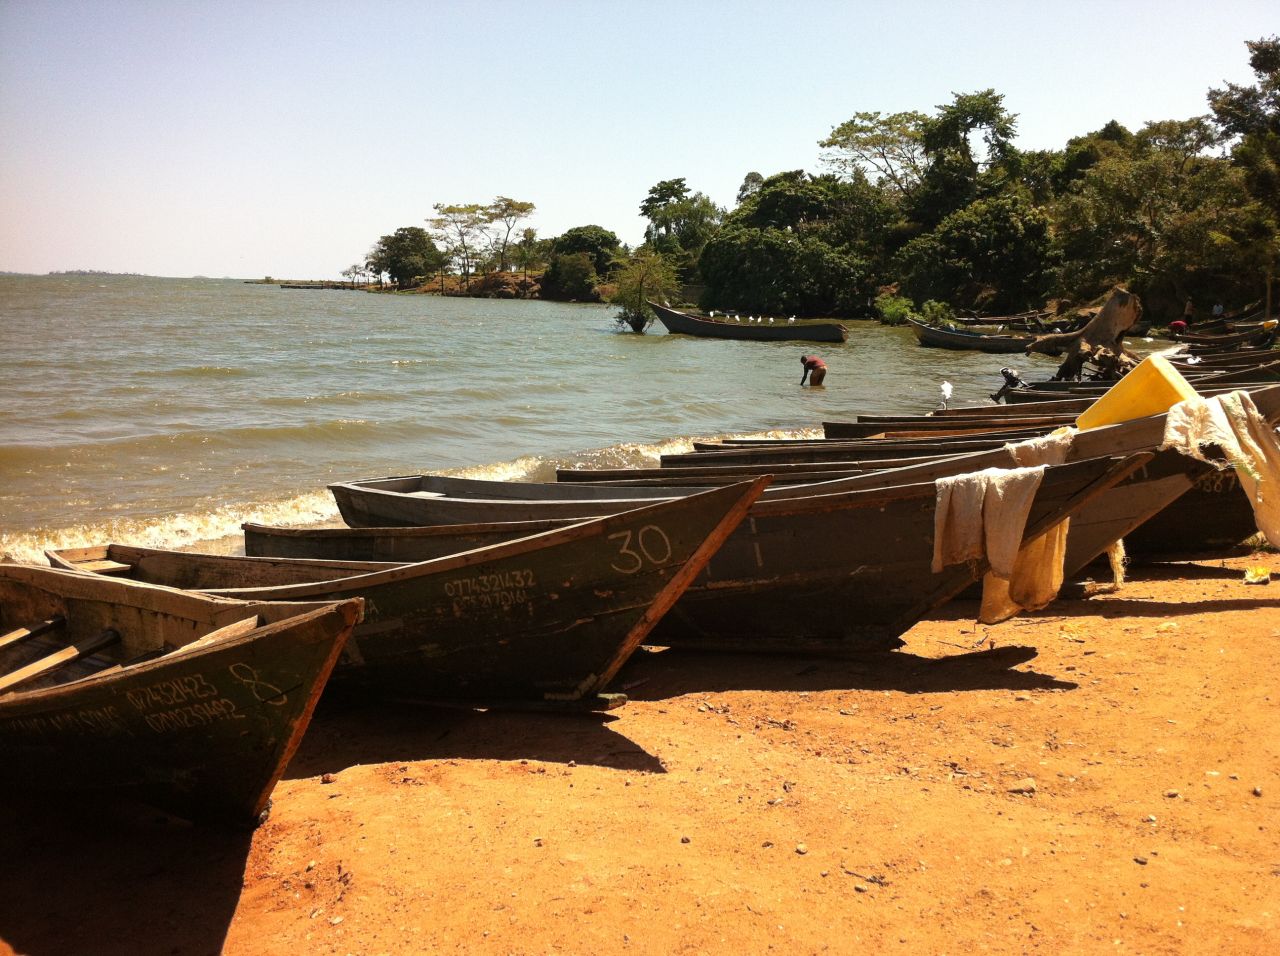 Fishing and island communities remain hotspots for the disease today, as locals rely on the lake -- and its water -- for their livelihoods. Pictured, the shores of the Busaabala fisihing community, Uganda.